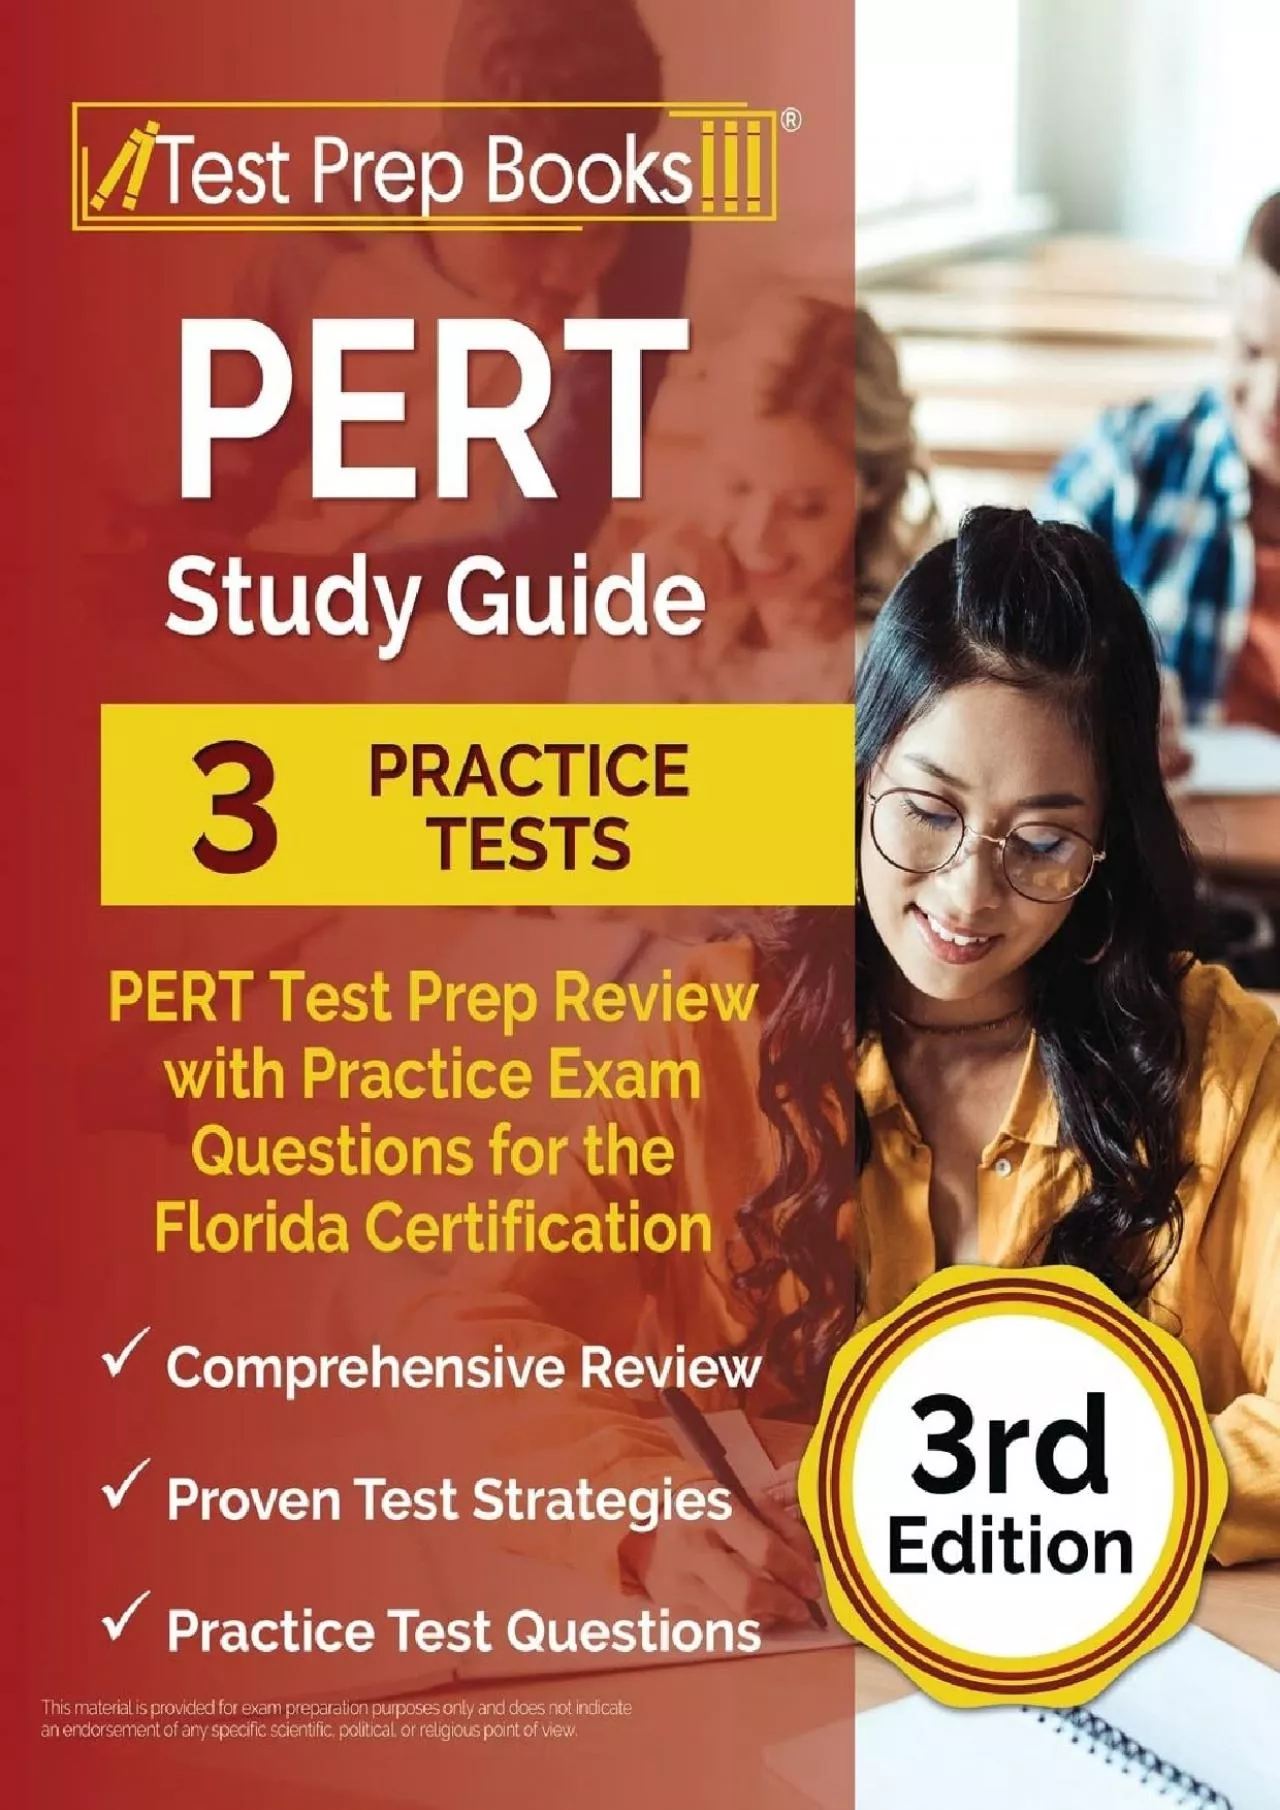 [DOWNLOAD] PERT Study Guide: PERT Test Prep Review with Practice Exam Questions for the